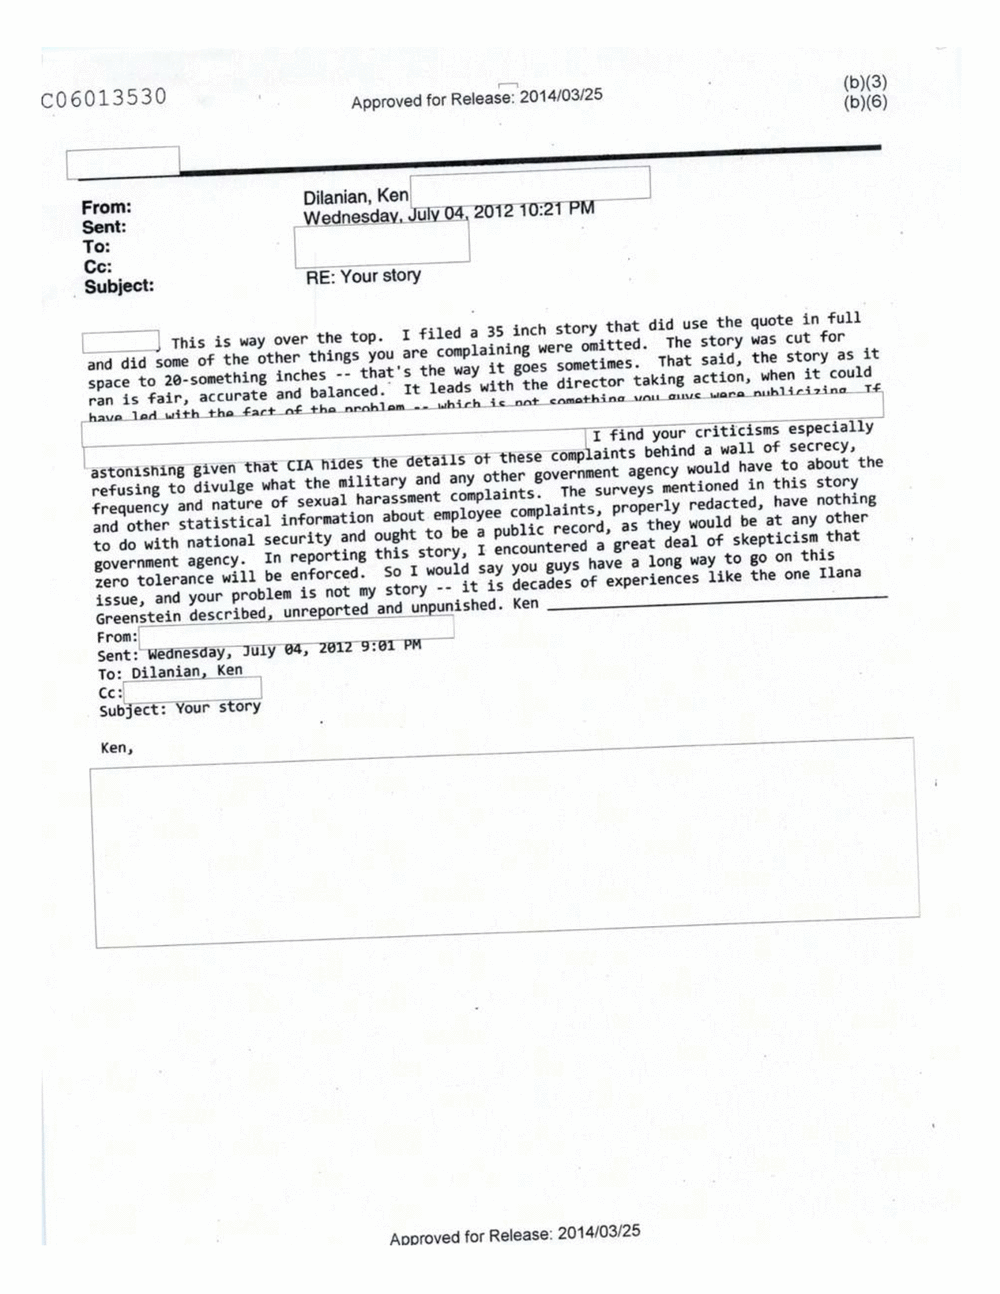 Page 369 from Email Correspondence Between Reporters and CIA Flacks